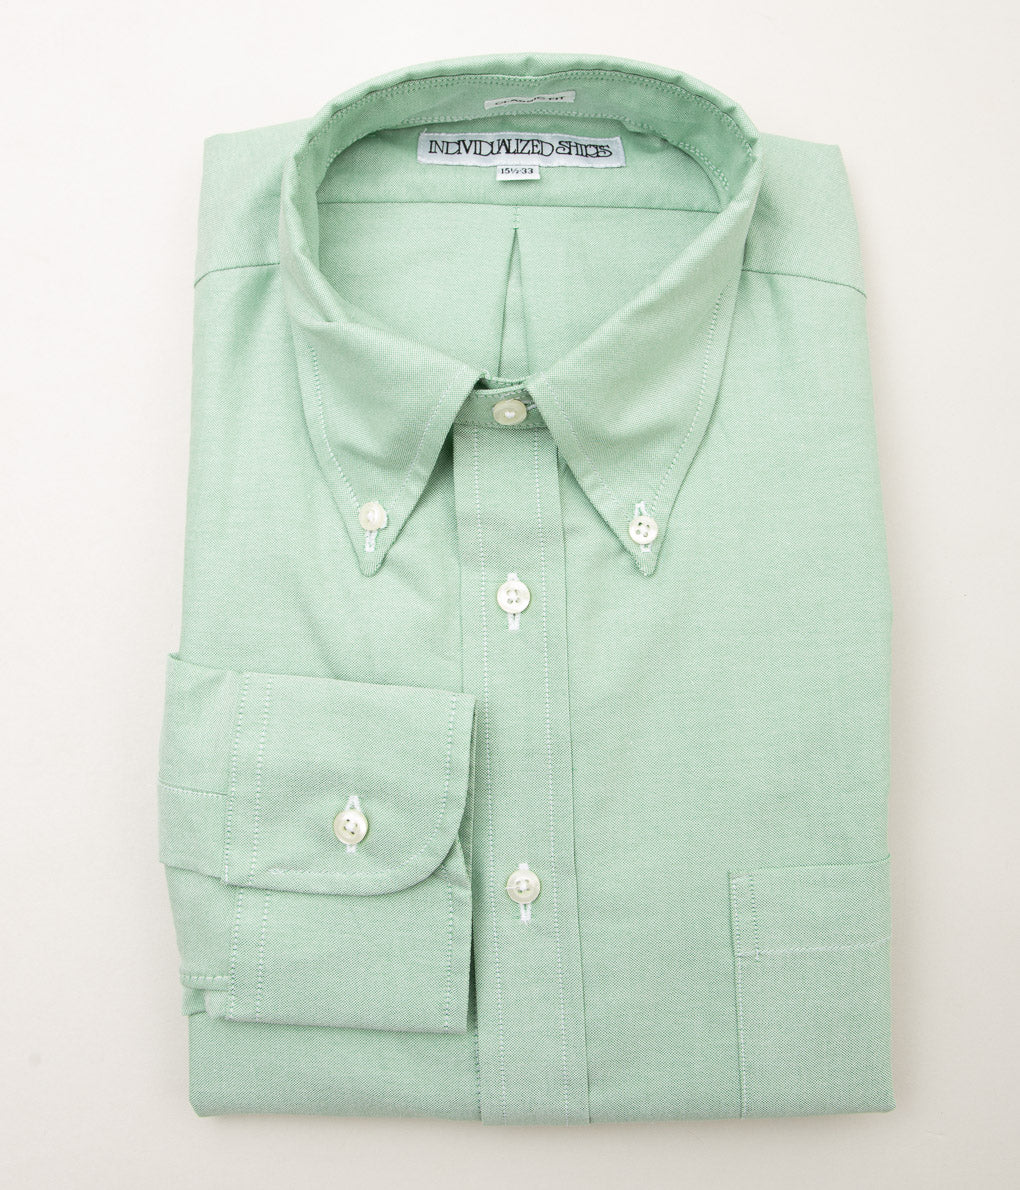 INDIVIDUALIZED SHIRTS "MILTON OXFORD CLASSIC FIT BUTTON DOWN SHIRT"(GREEN)